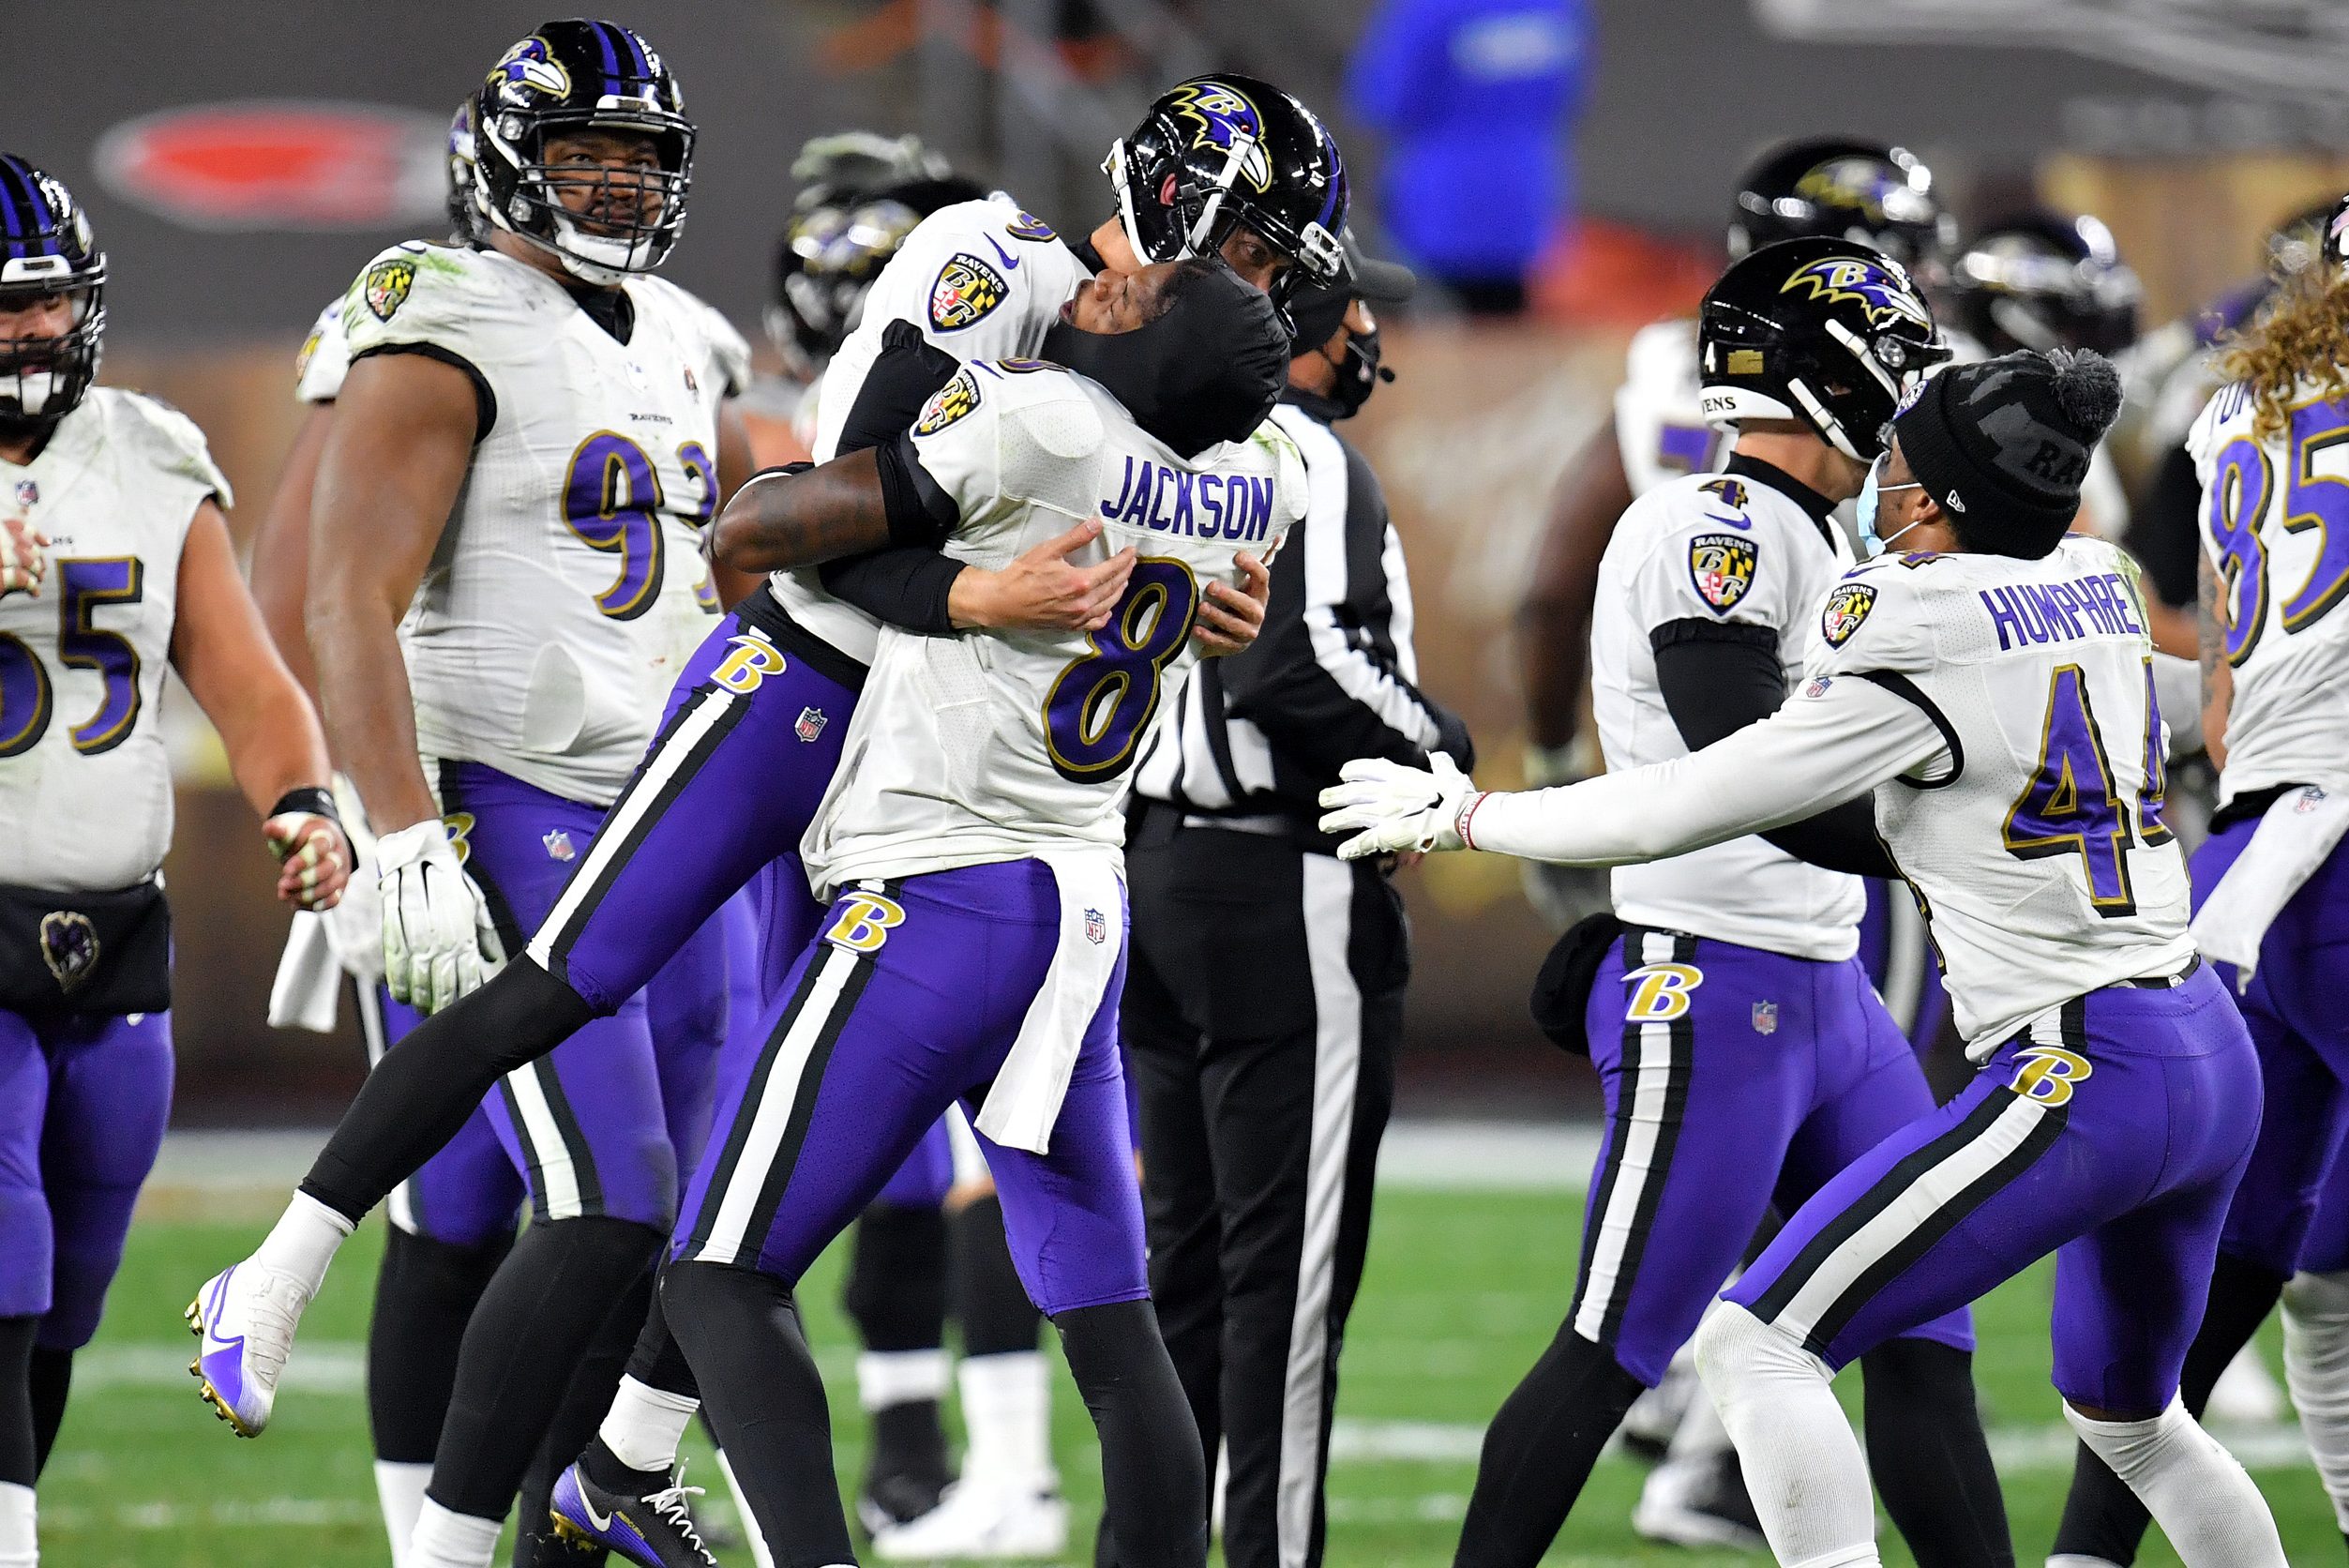 Baltimore Gets Huge Win in Ravens-Browns Battle on "Monday Night Football"